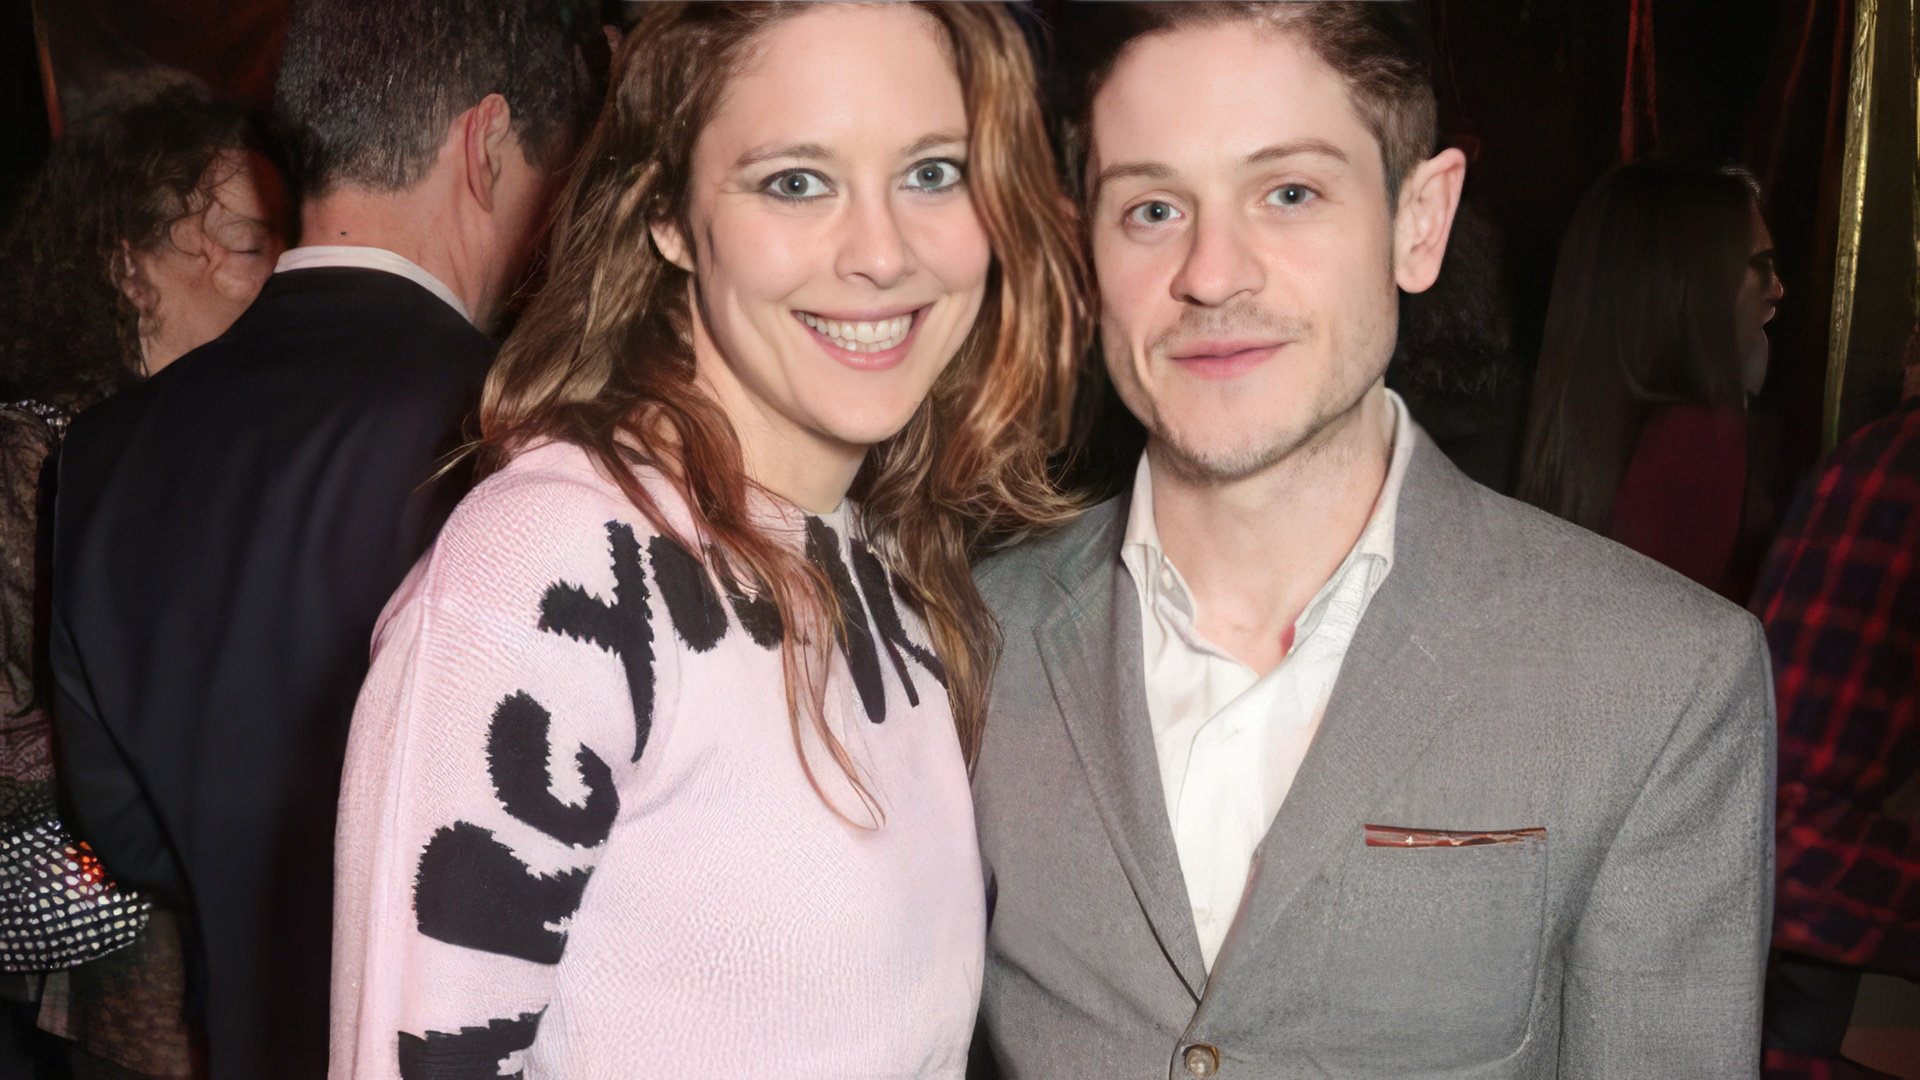 In the photo: Iwan Rheon and Zoe Grisdale